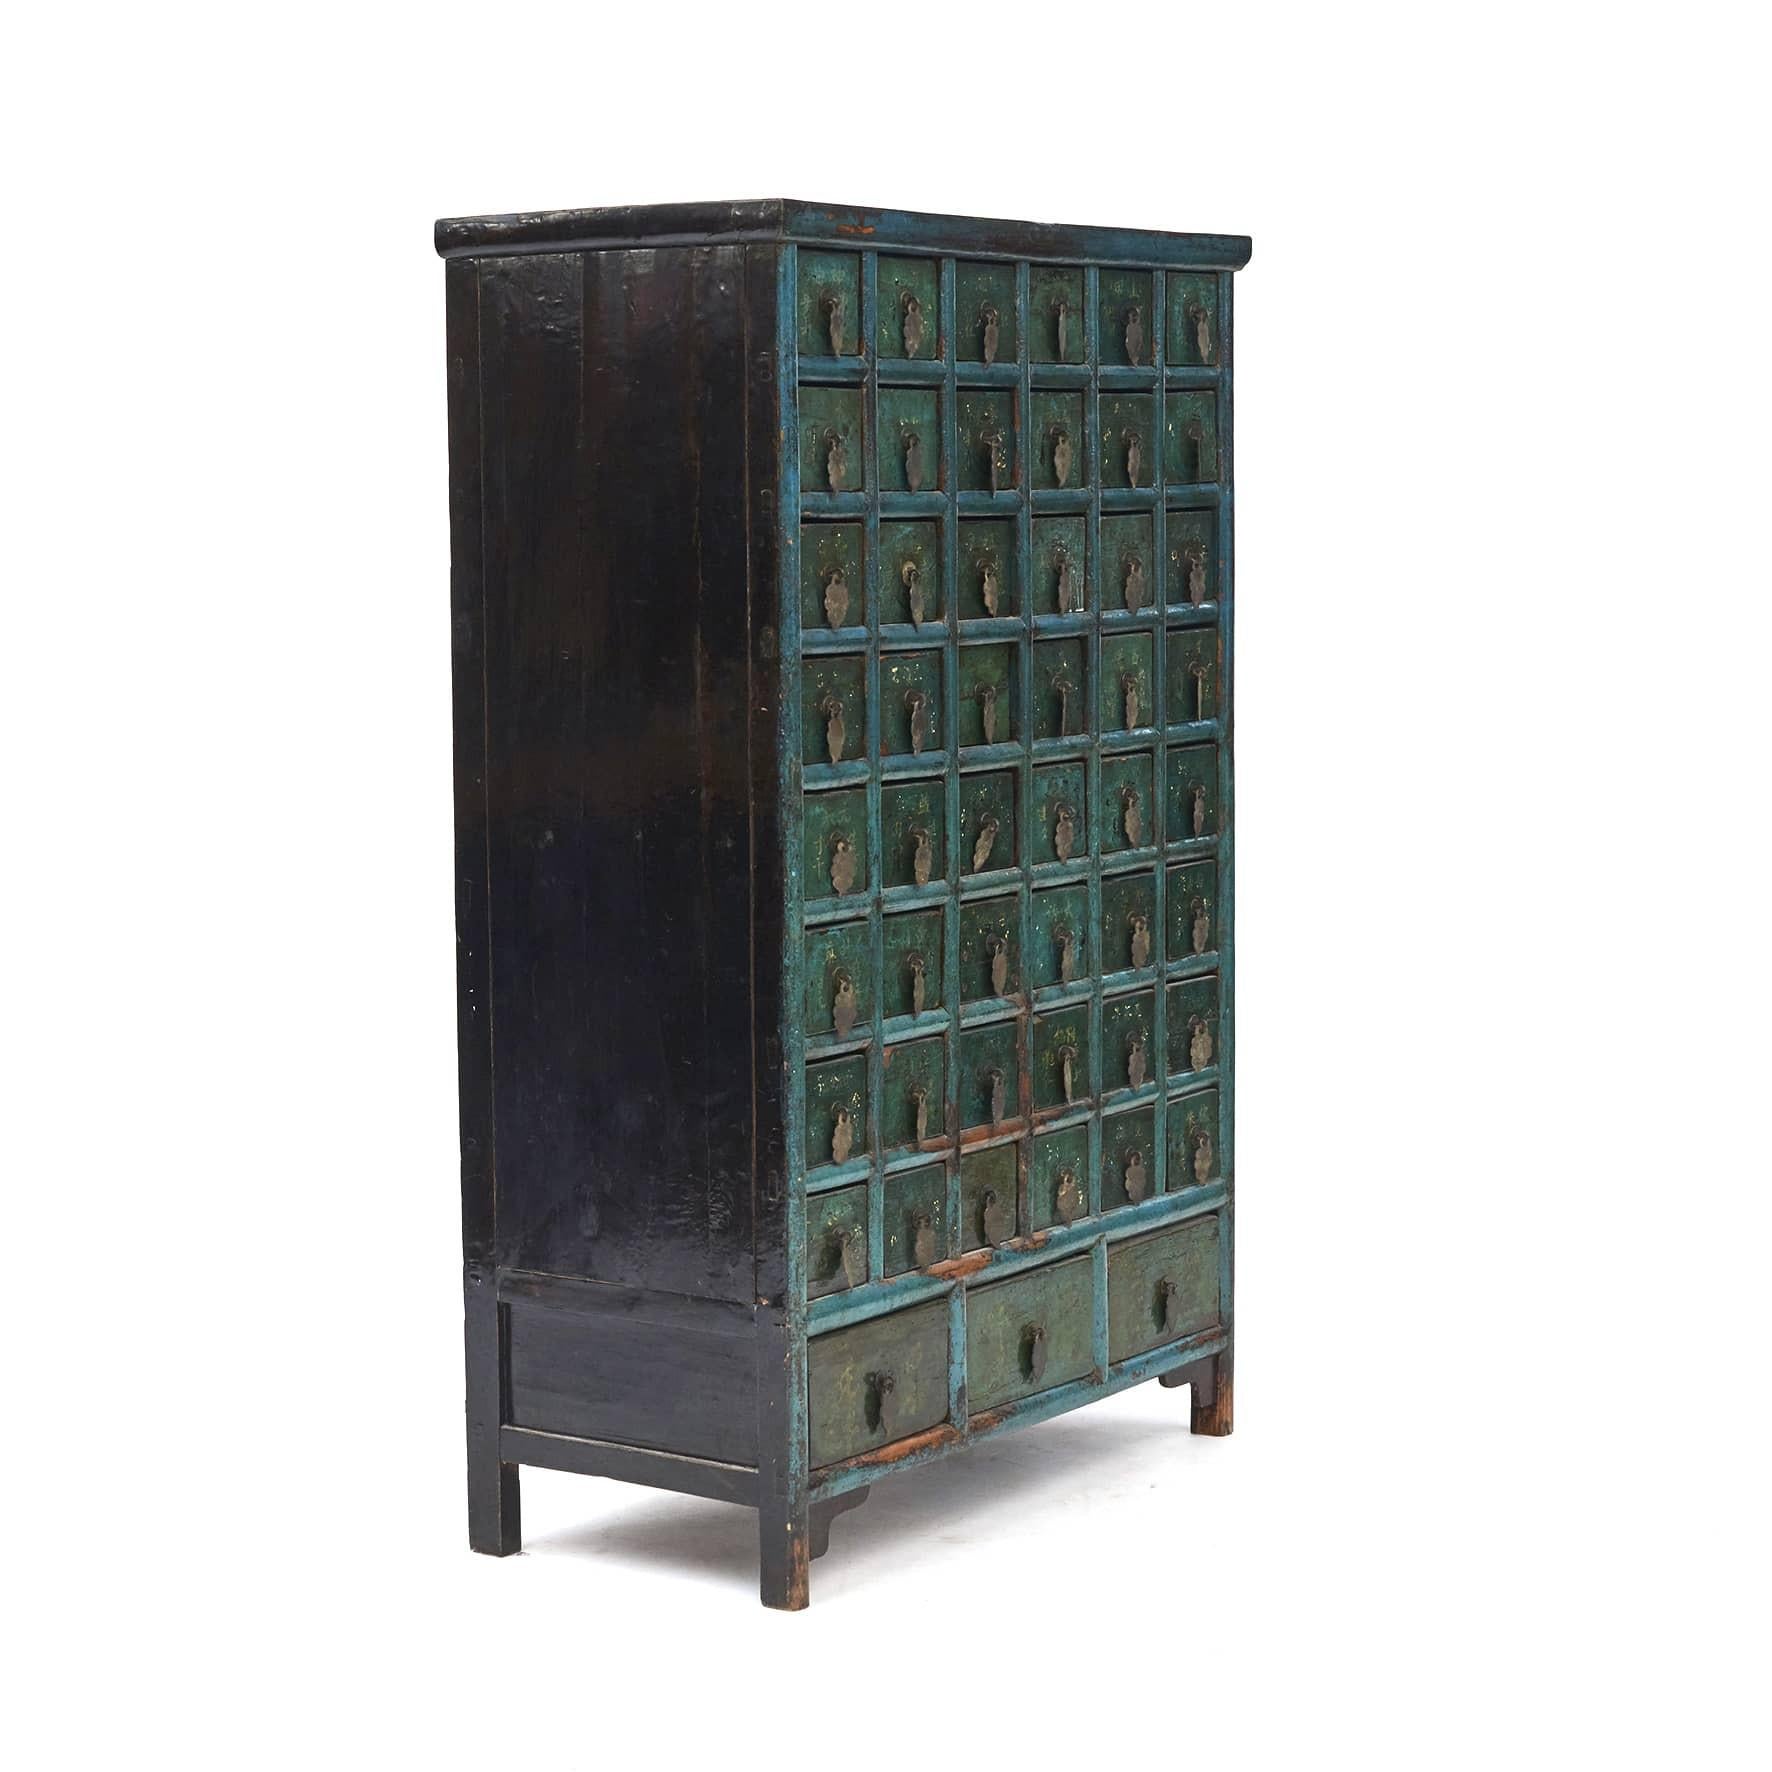 Qing Mid 19th Century Chinese Apothecary Medicine Chest with 51 Drawers